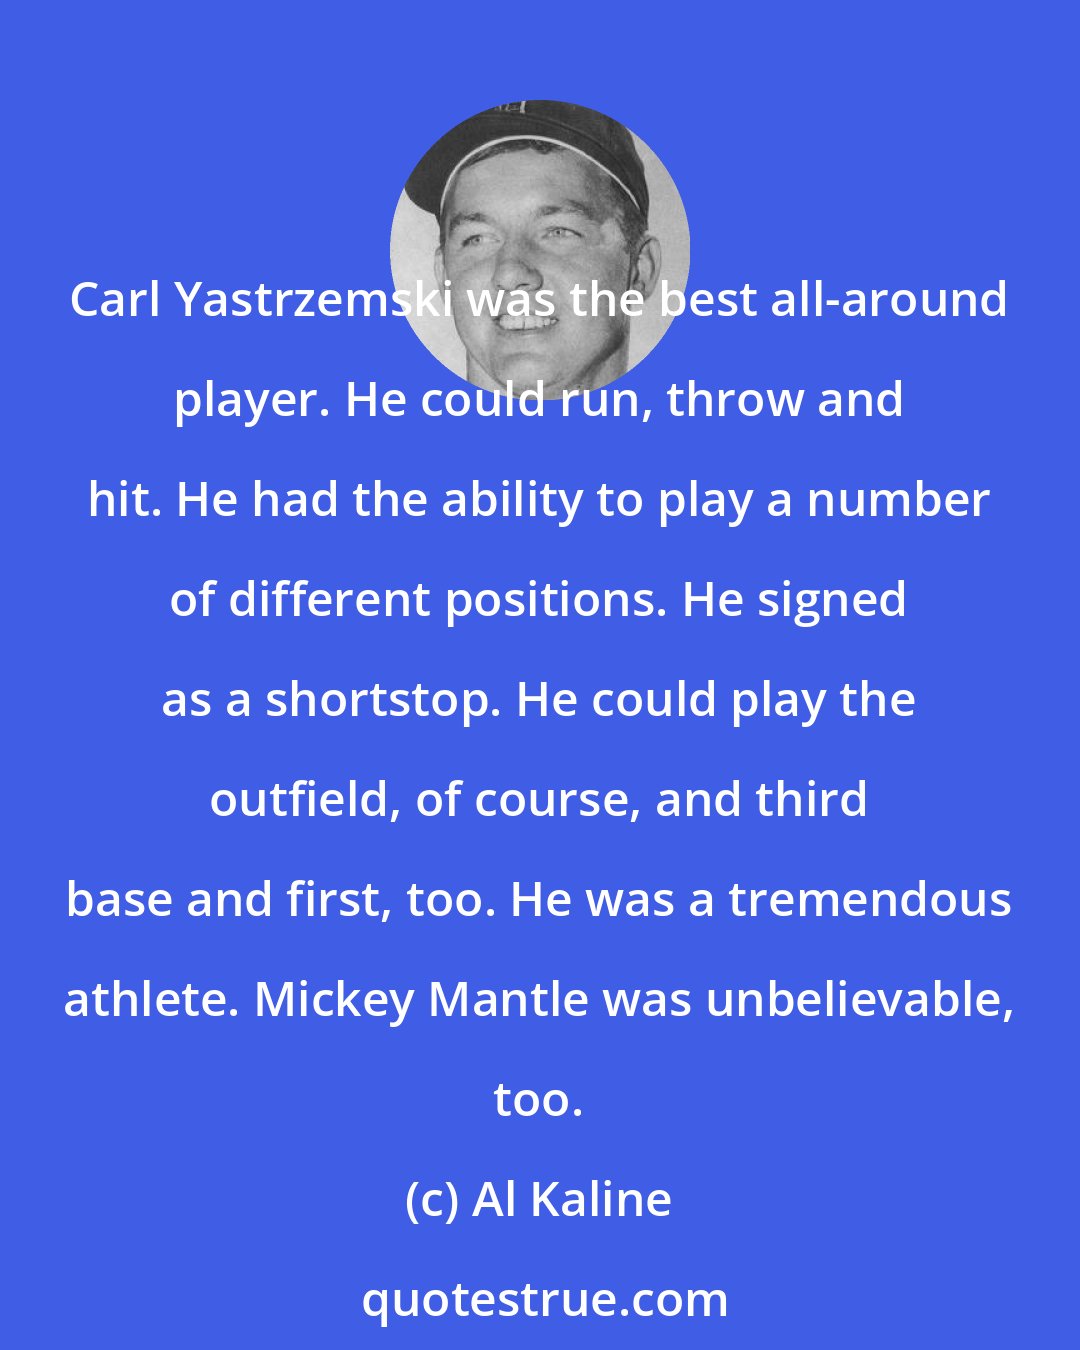 Al Kaline: Carl Yastrzemski was the best all-around player. He could run, throw and hit. He had the ability to play a number of different positions. He signed as a shortstop. He could play the outfield, of course, and third base and first, too. He was a tremendous athlete. Mickey Mantle was unbelievable, too.